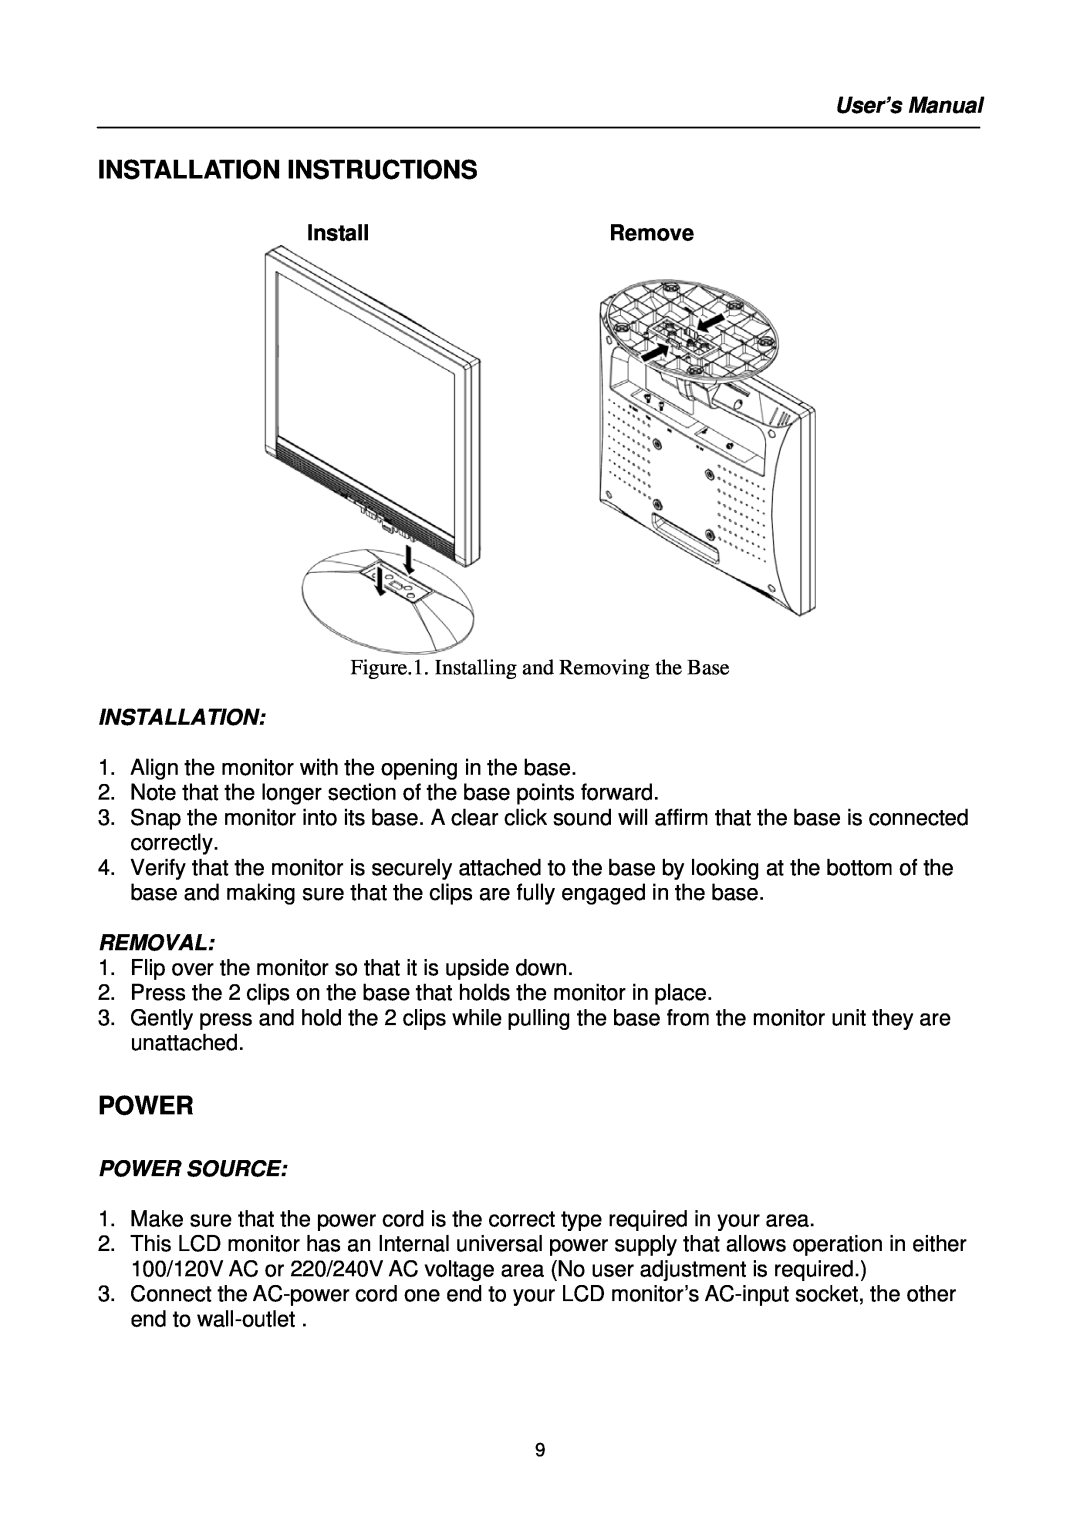 Hanns.G HC19 Series user manual Installation Instructions, Removal, Power Source, User’s Manual 